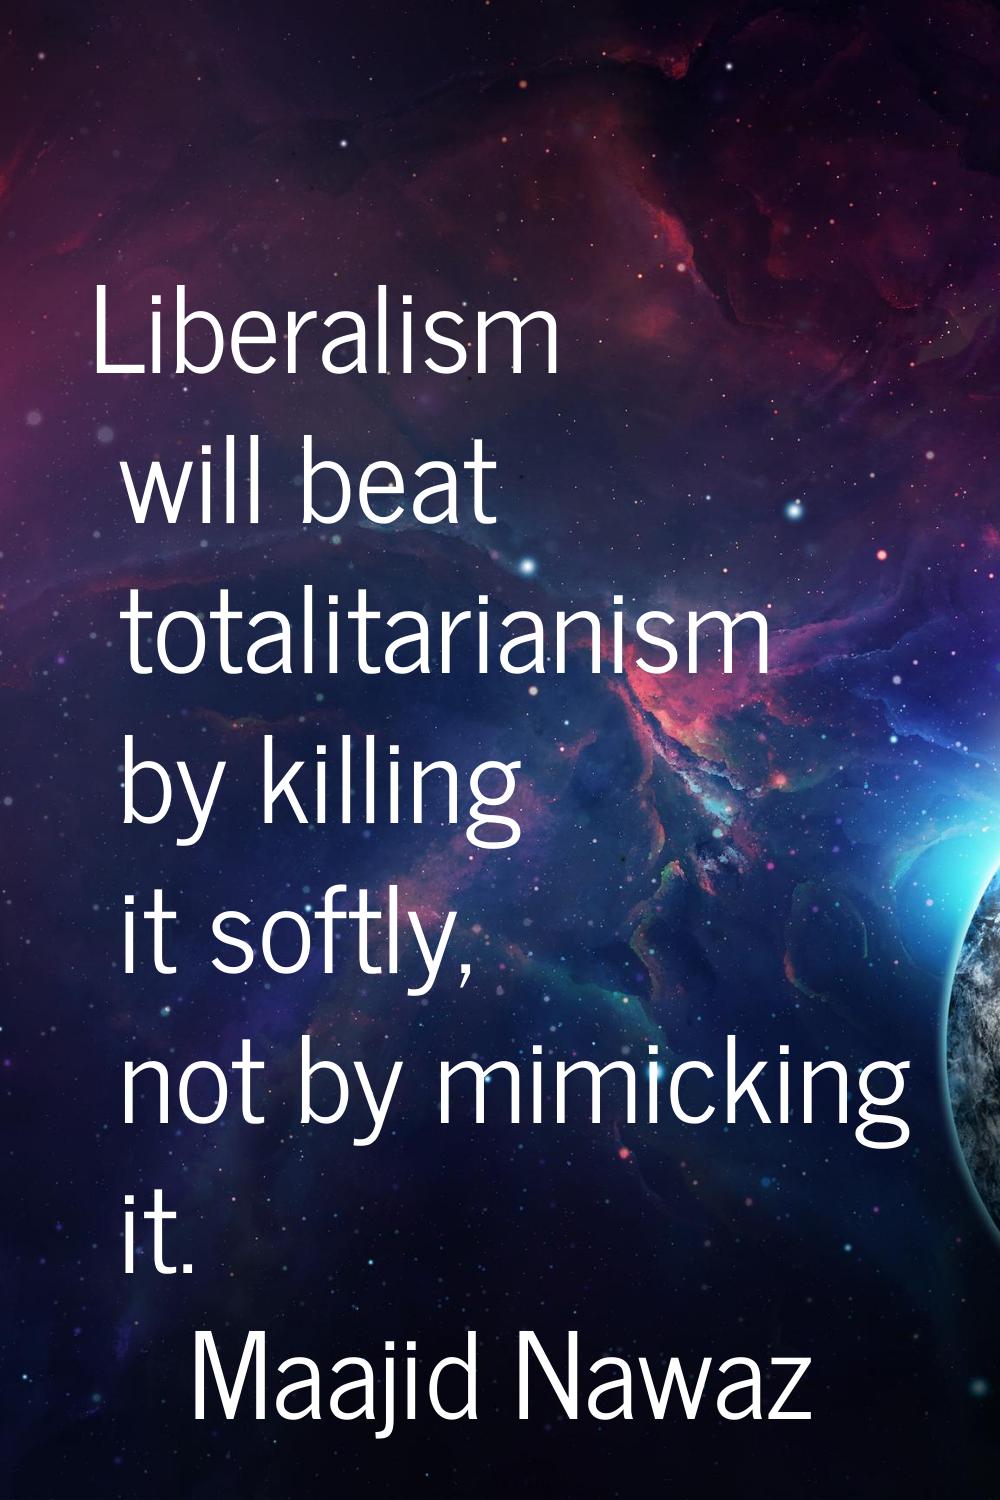 Liberalism will beat totalitarianism by killing it softly, not by mimicking it.